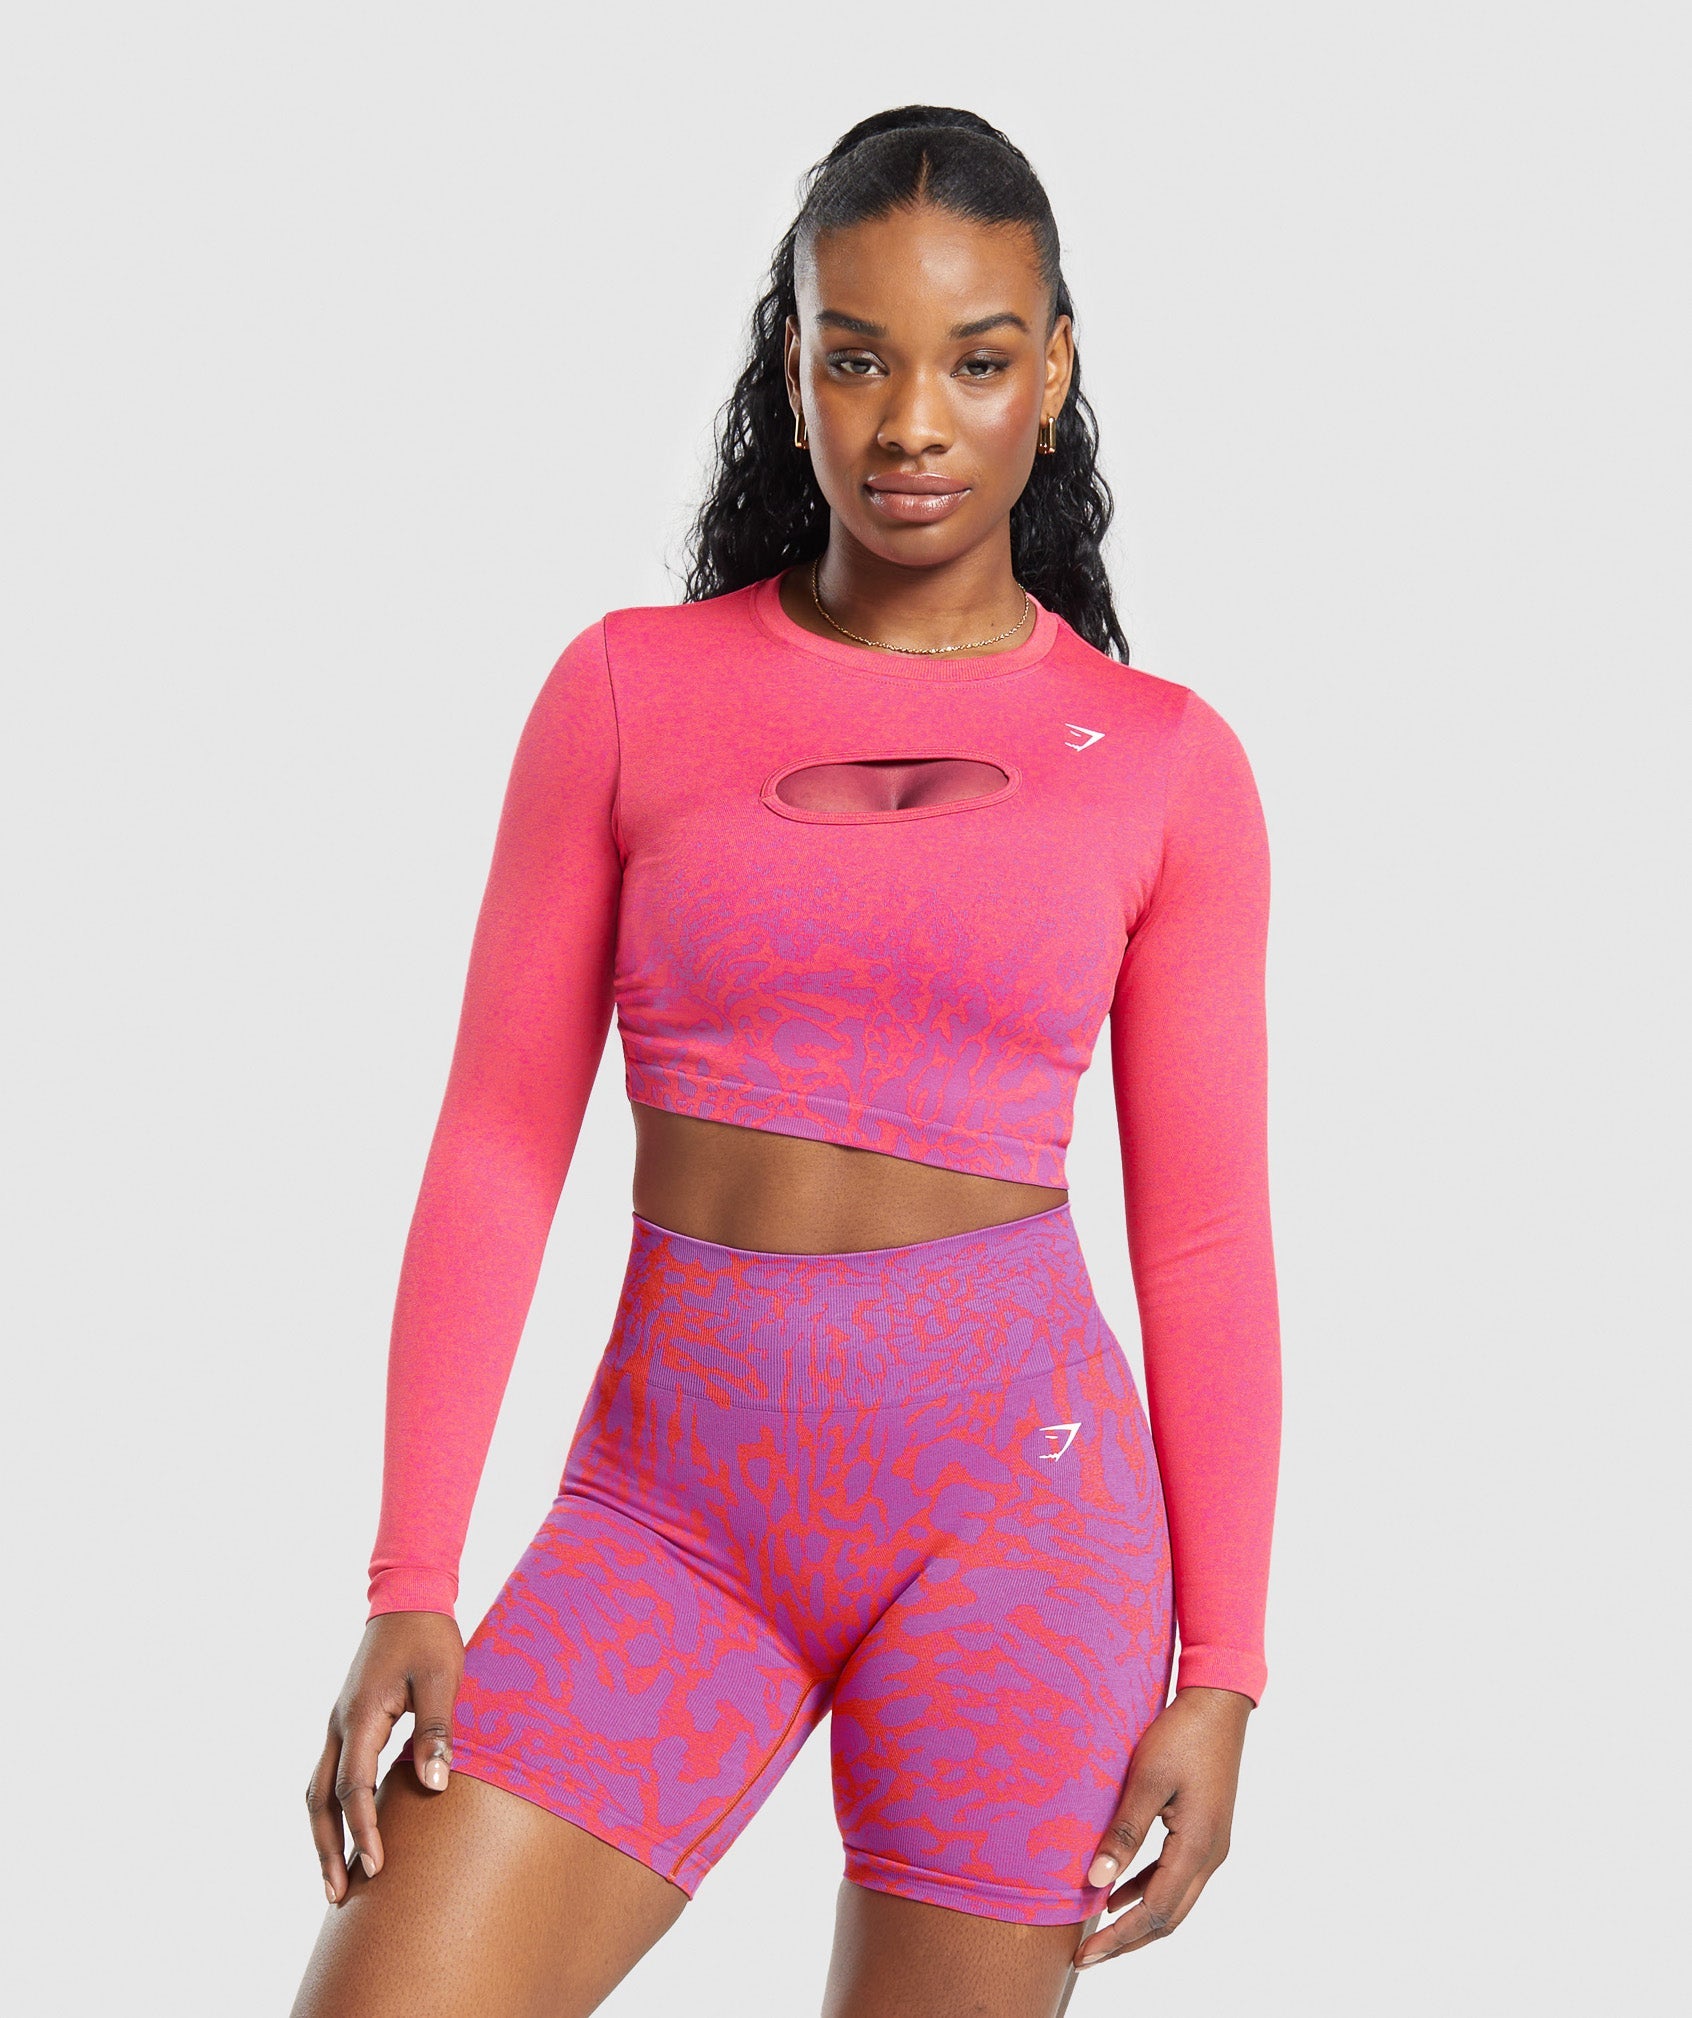 Adapt Pattern Seamless Faded Long Sleeve Top in Shelly Pink/Fly Coral